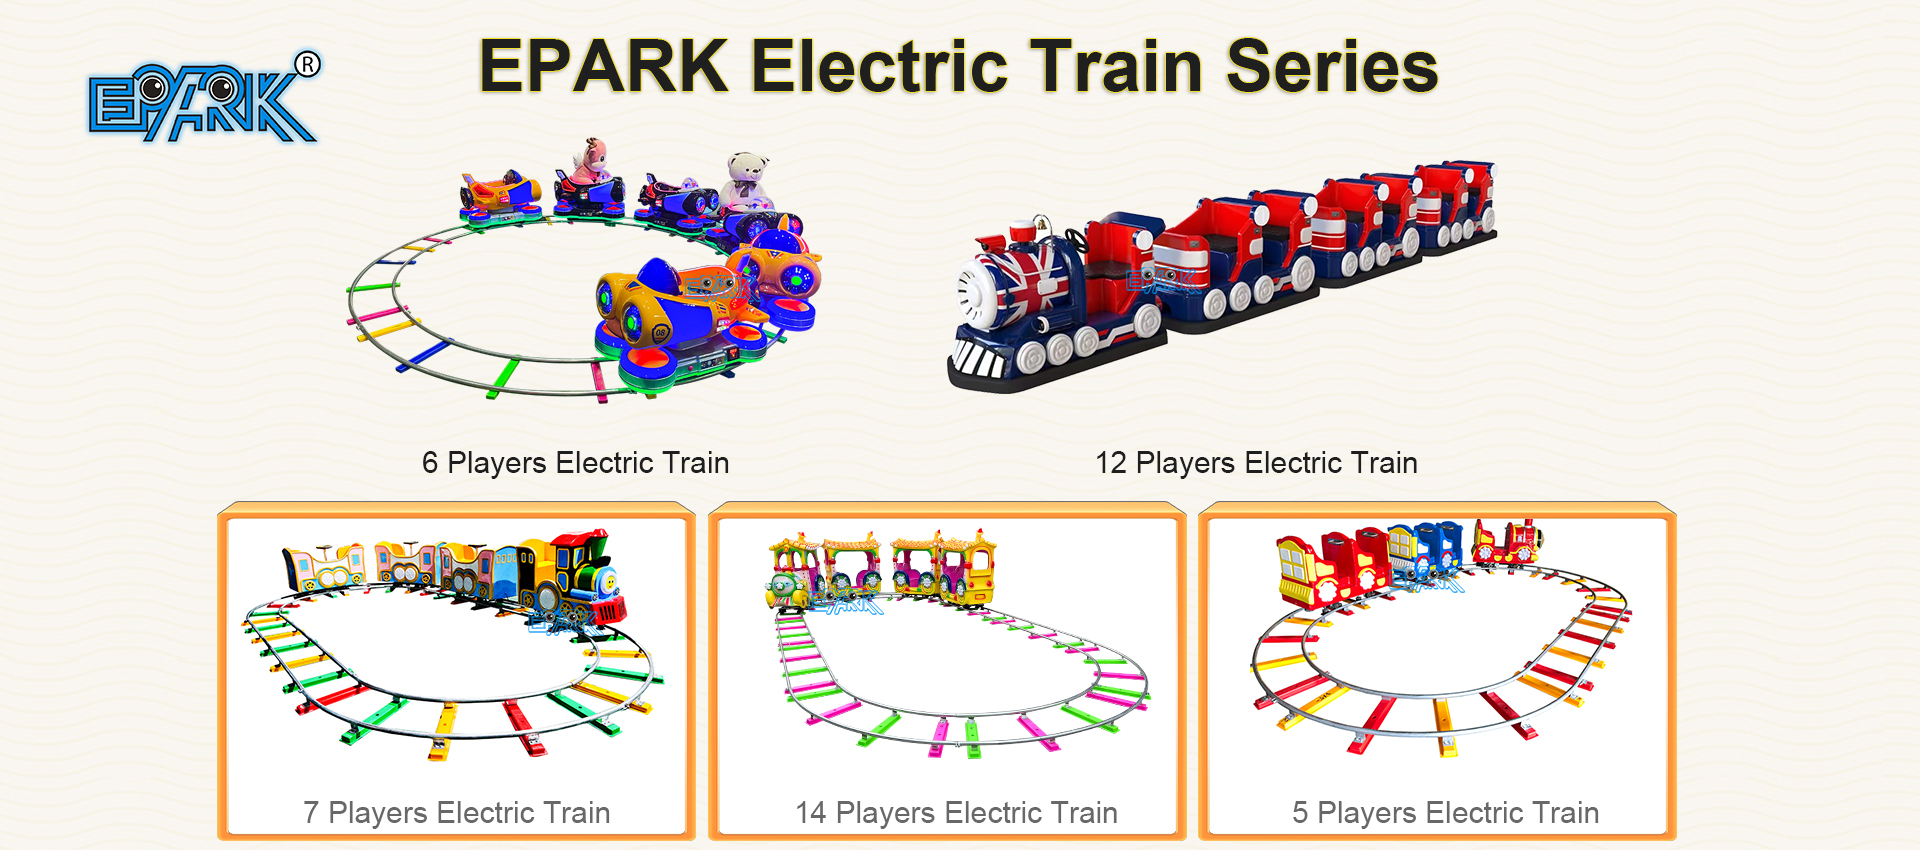 How to an electric train work？